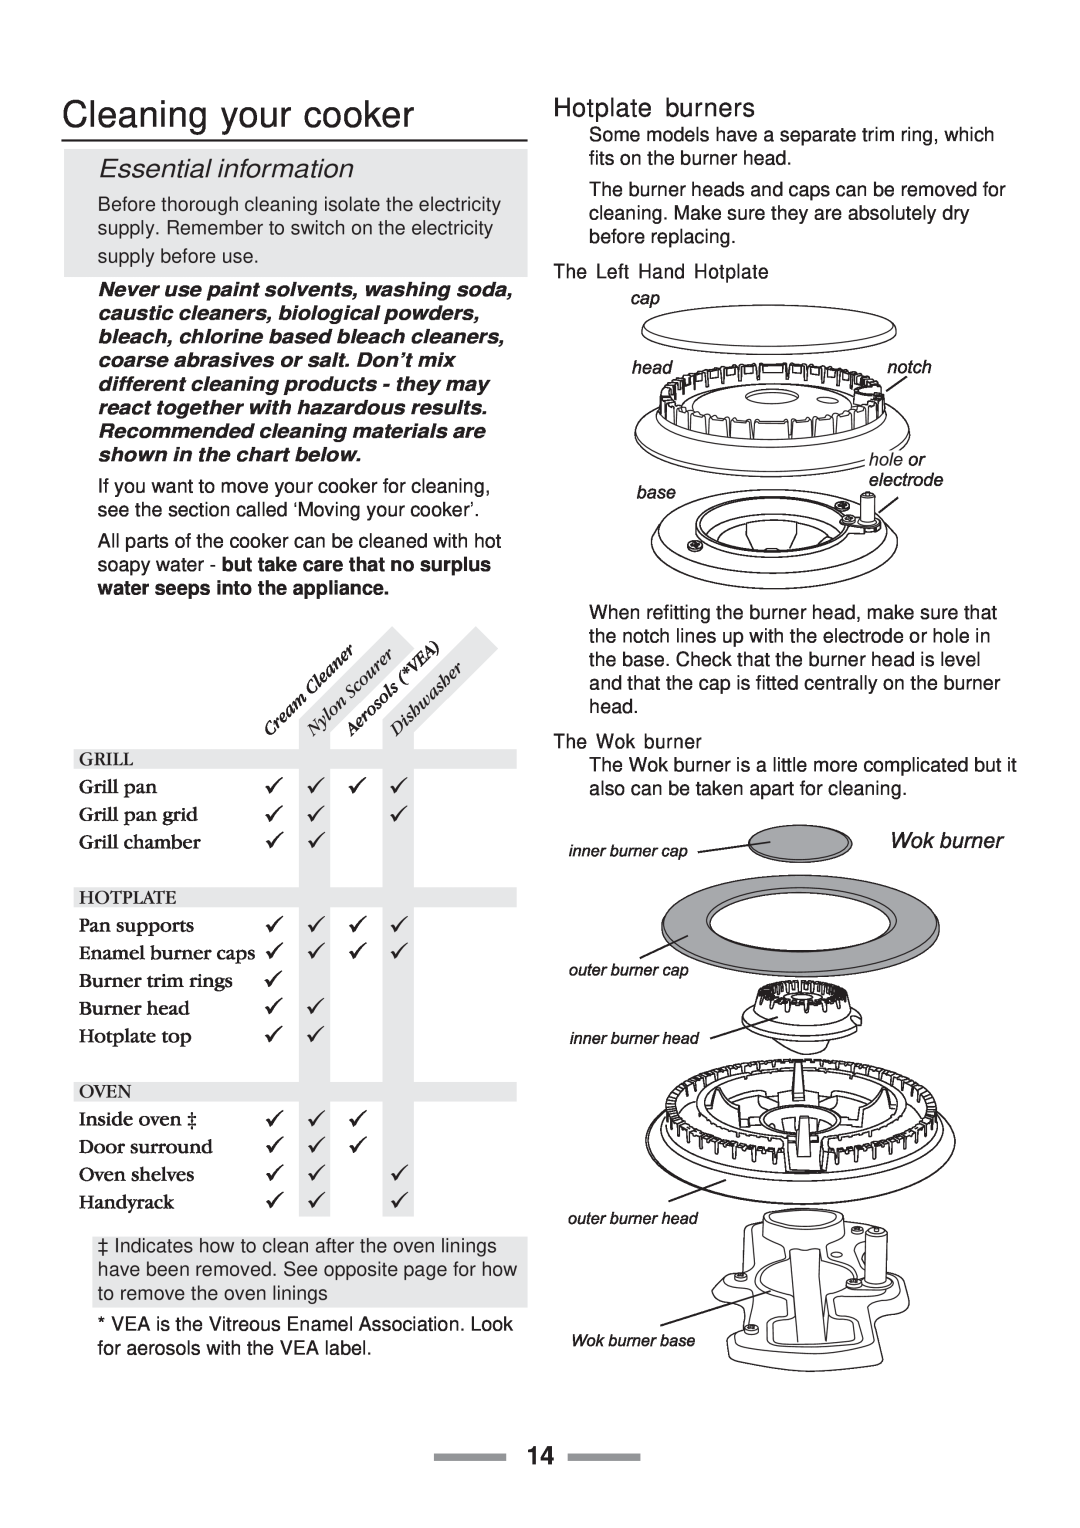 Rangemaster 110 installation instructions Cleaning your cooker, Hotplate burners, Essential information 